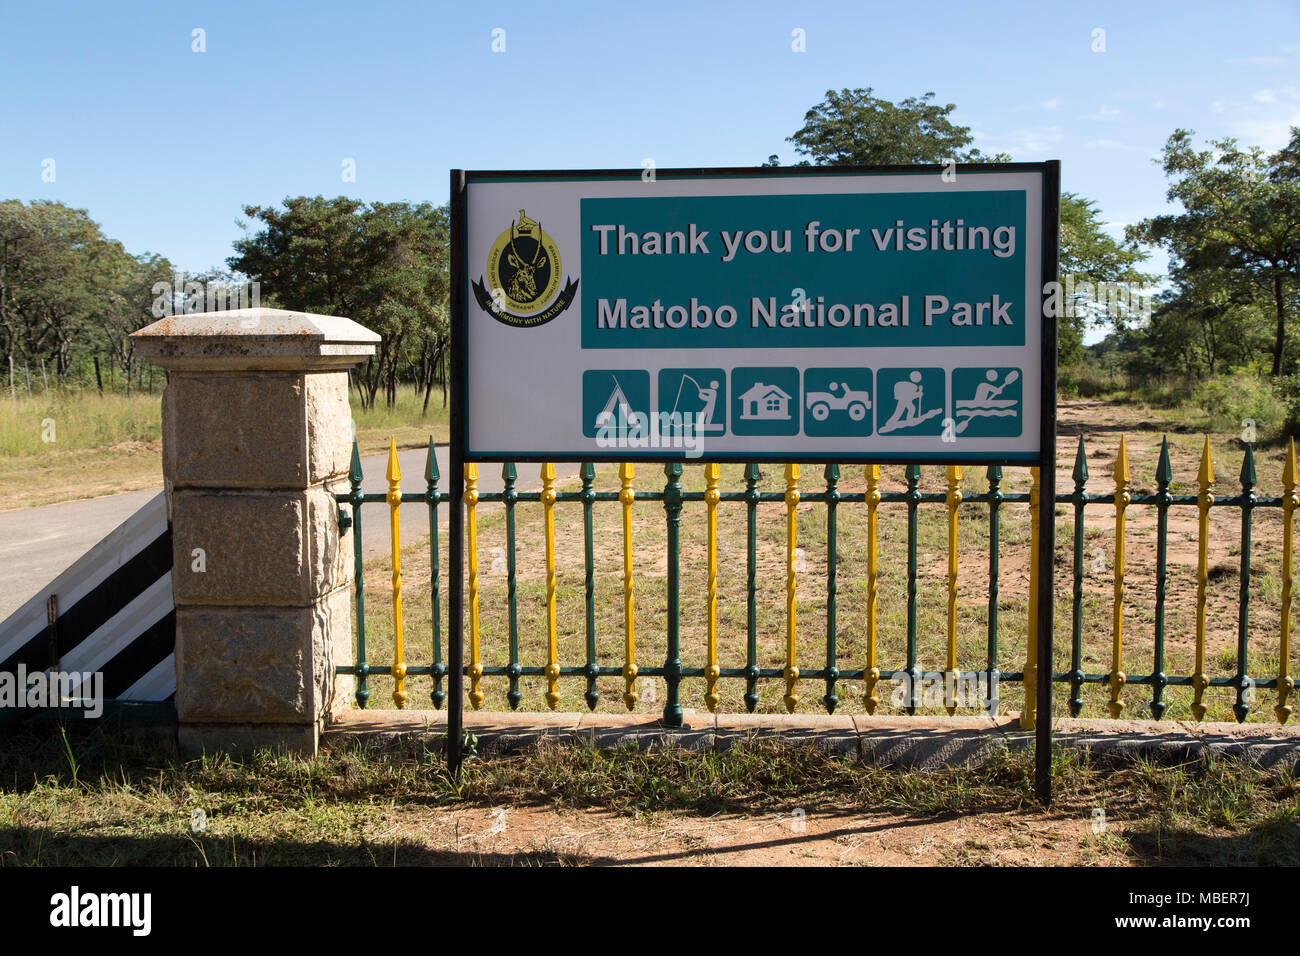 A sign thanking people for visiting Matobo National Park in Zimbabwe. The national park is a UNESCO World Heritage Site. Stock Photo